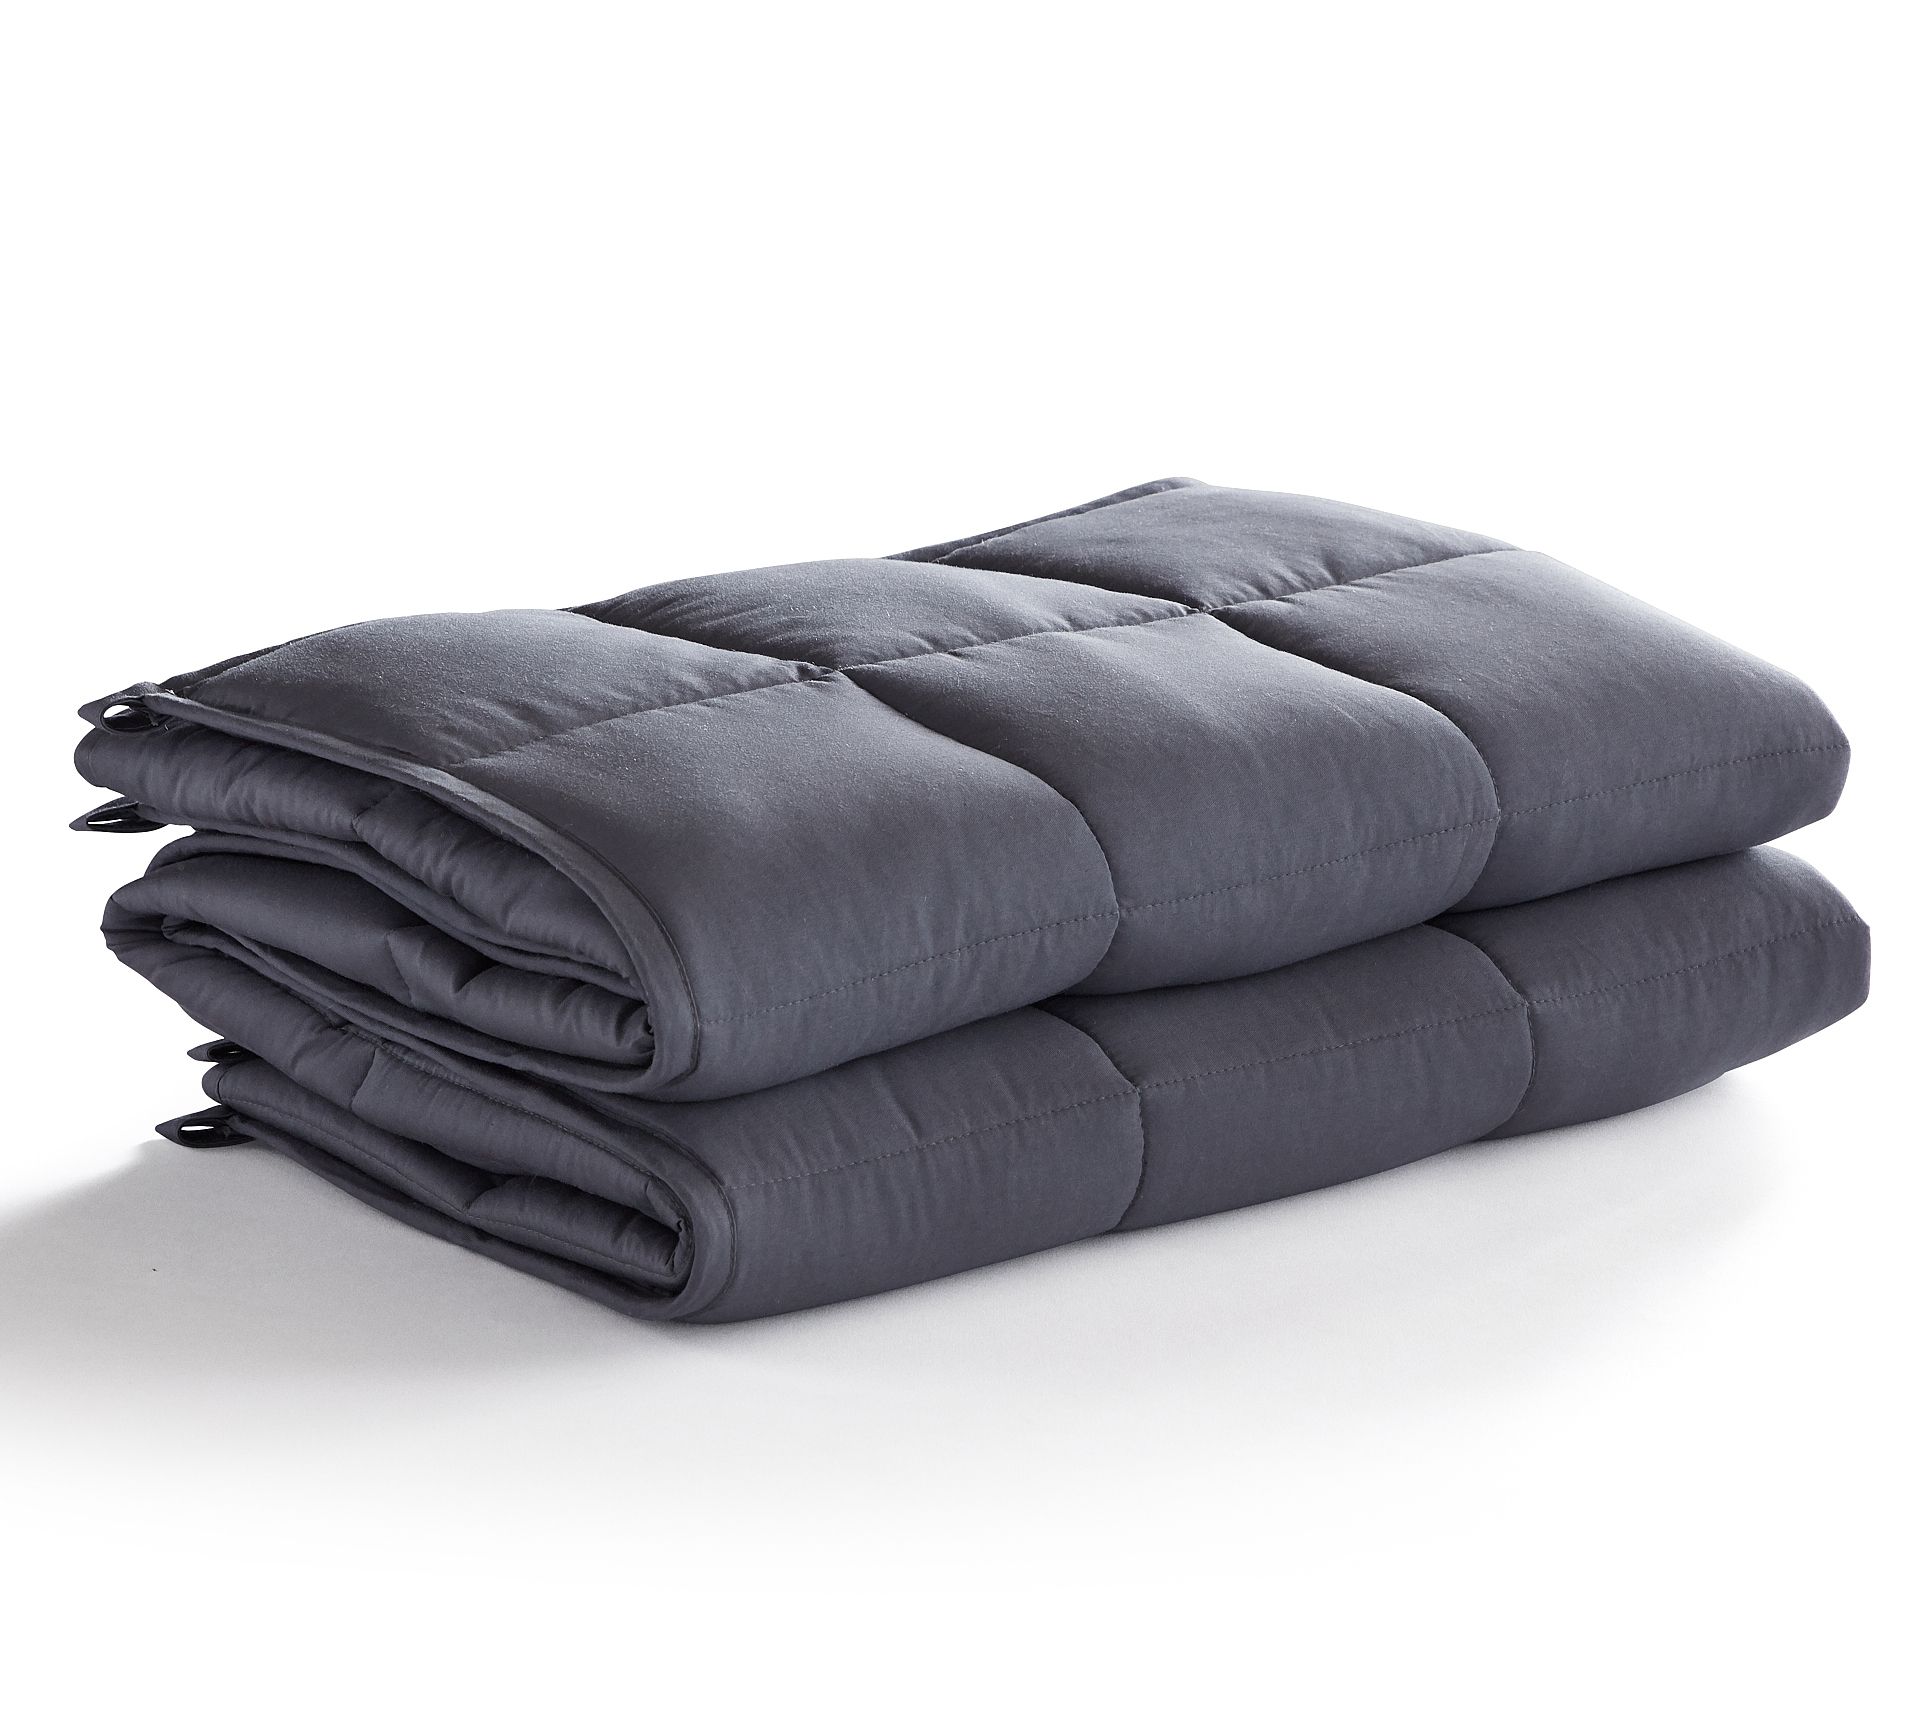 LUCID Comfort Collection Weighted Blanket - 60" x 80" - 15 lb - QVC.com